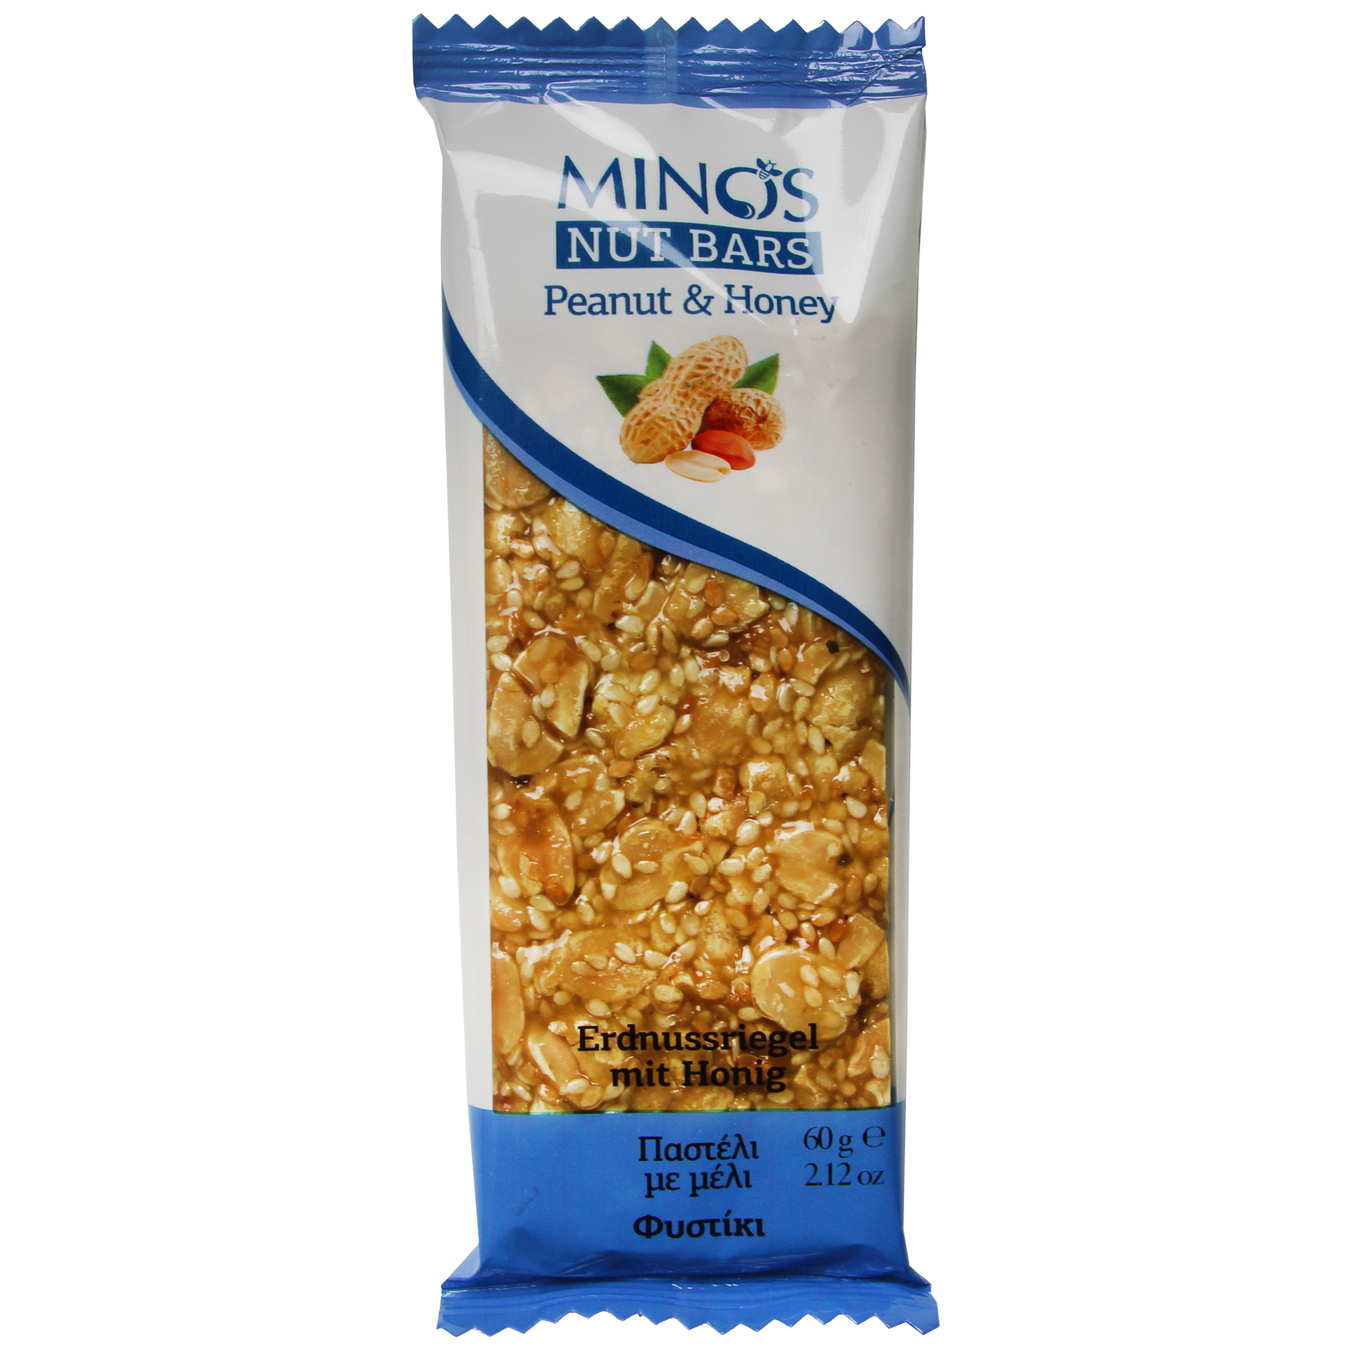 Minos With Peanuts And Honey Nut Bar 60g